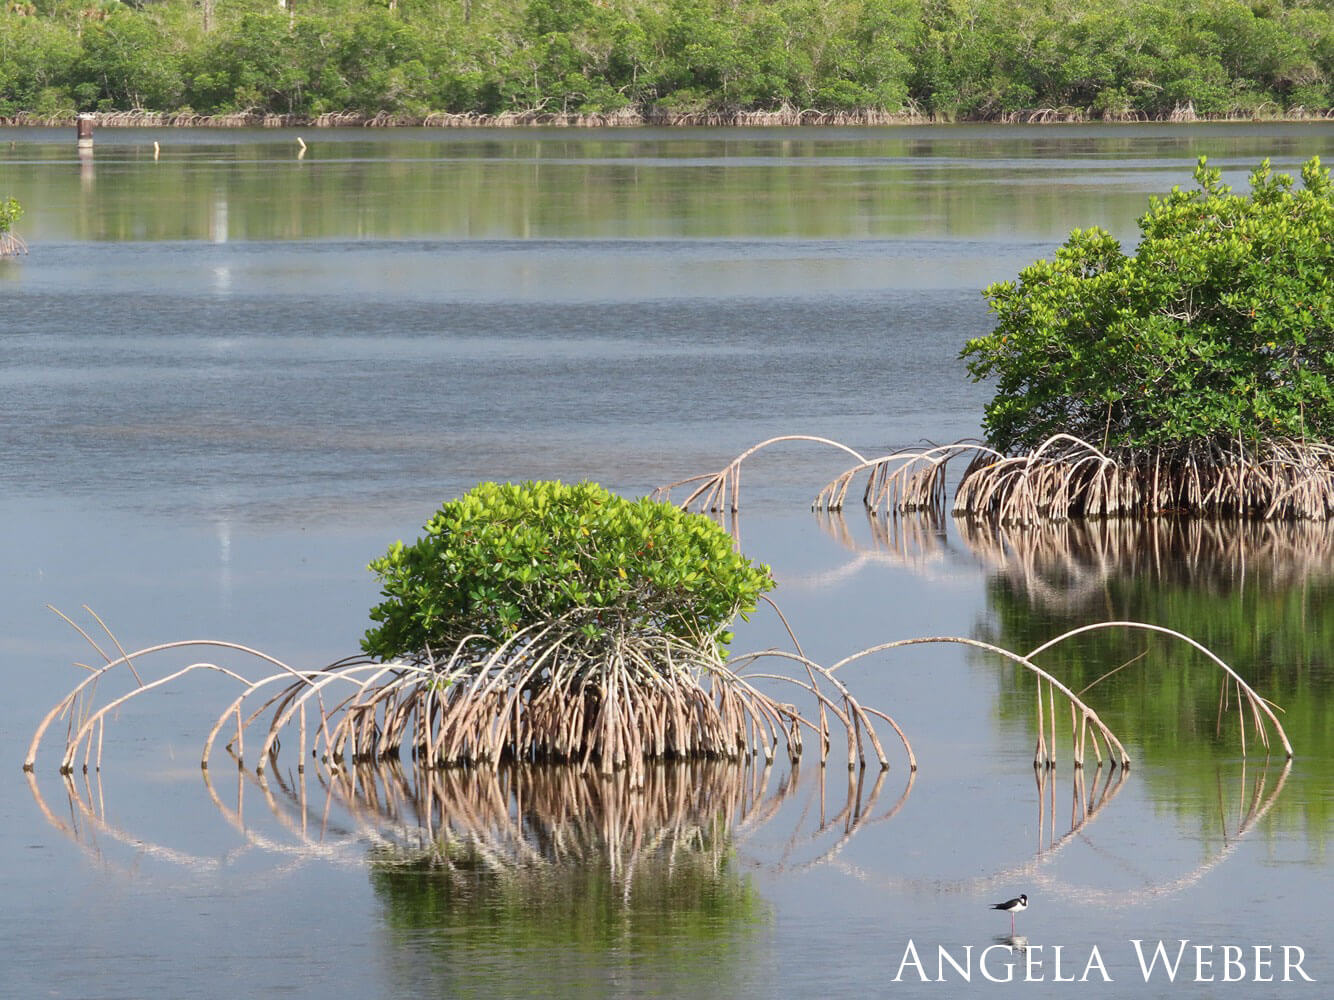 Mangrove roots at low tide.